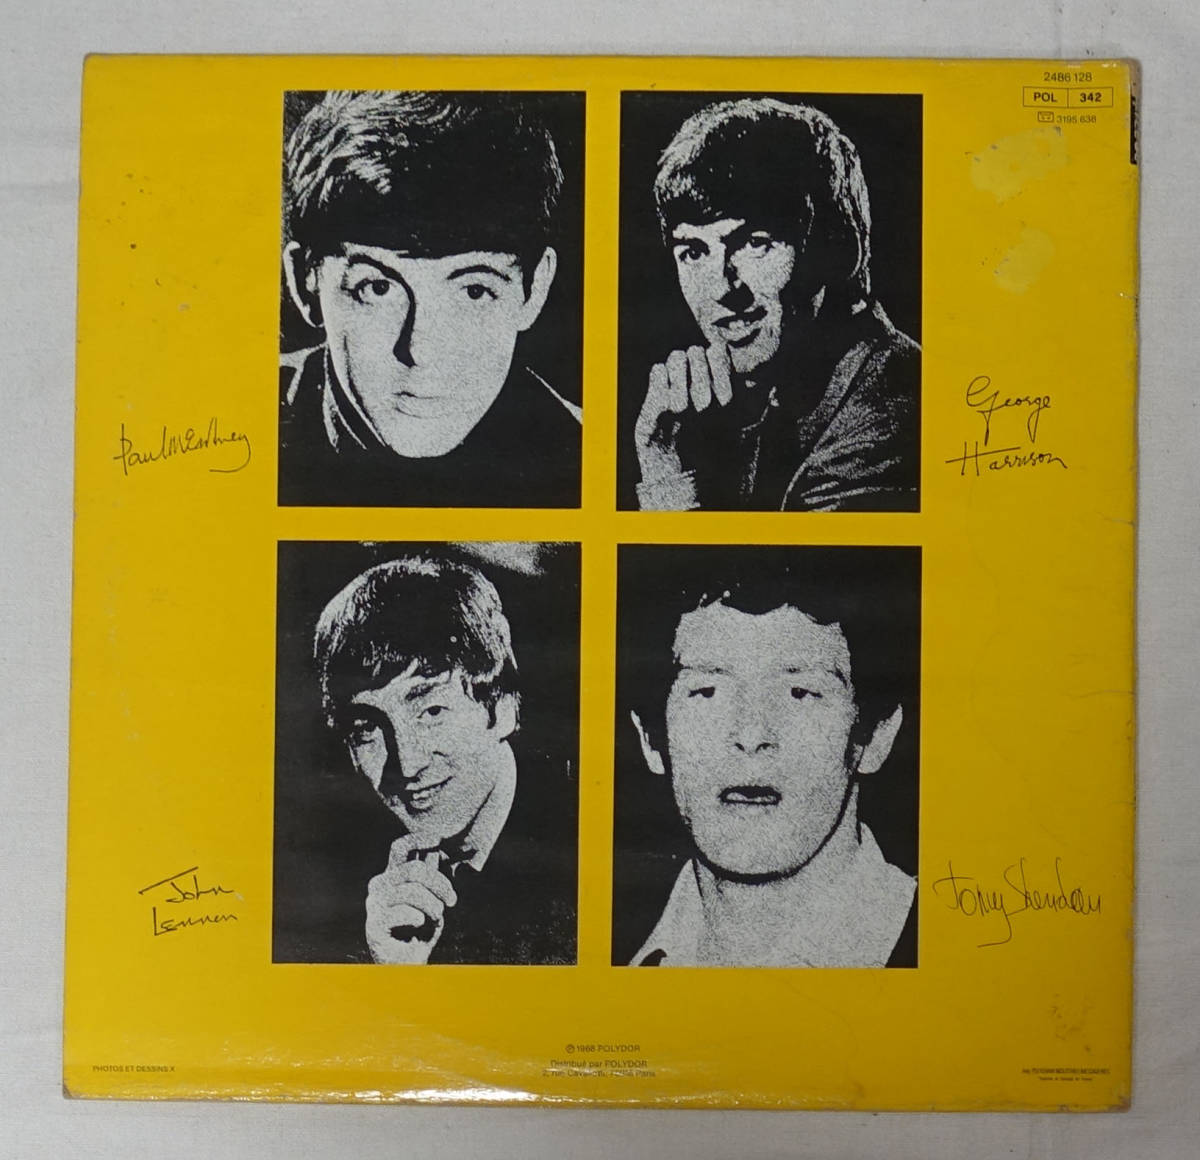  France Polydor オリジナル The Beatles First_画像3